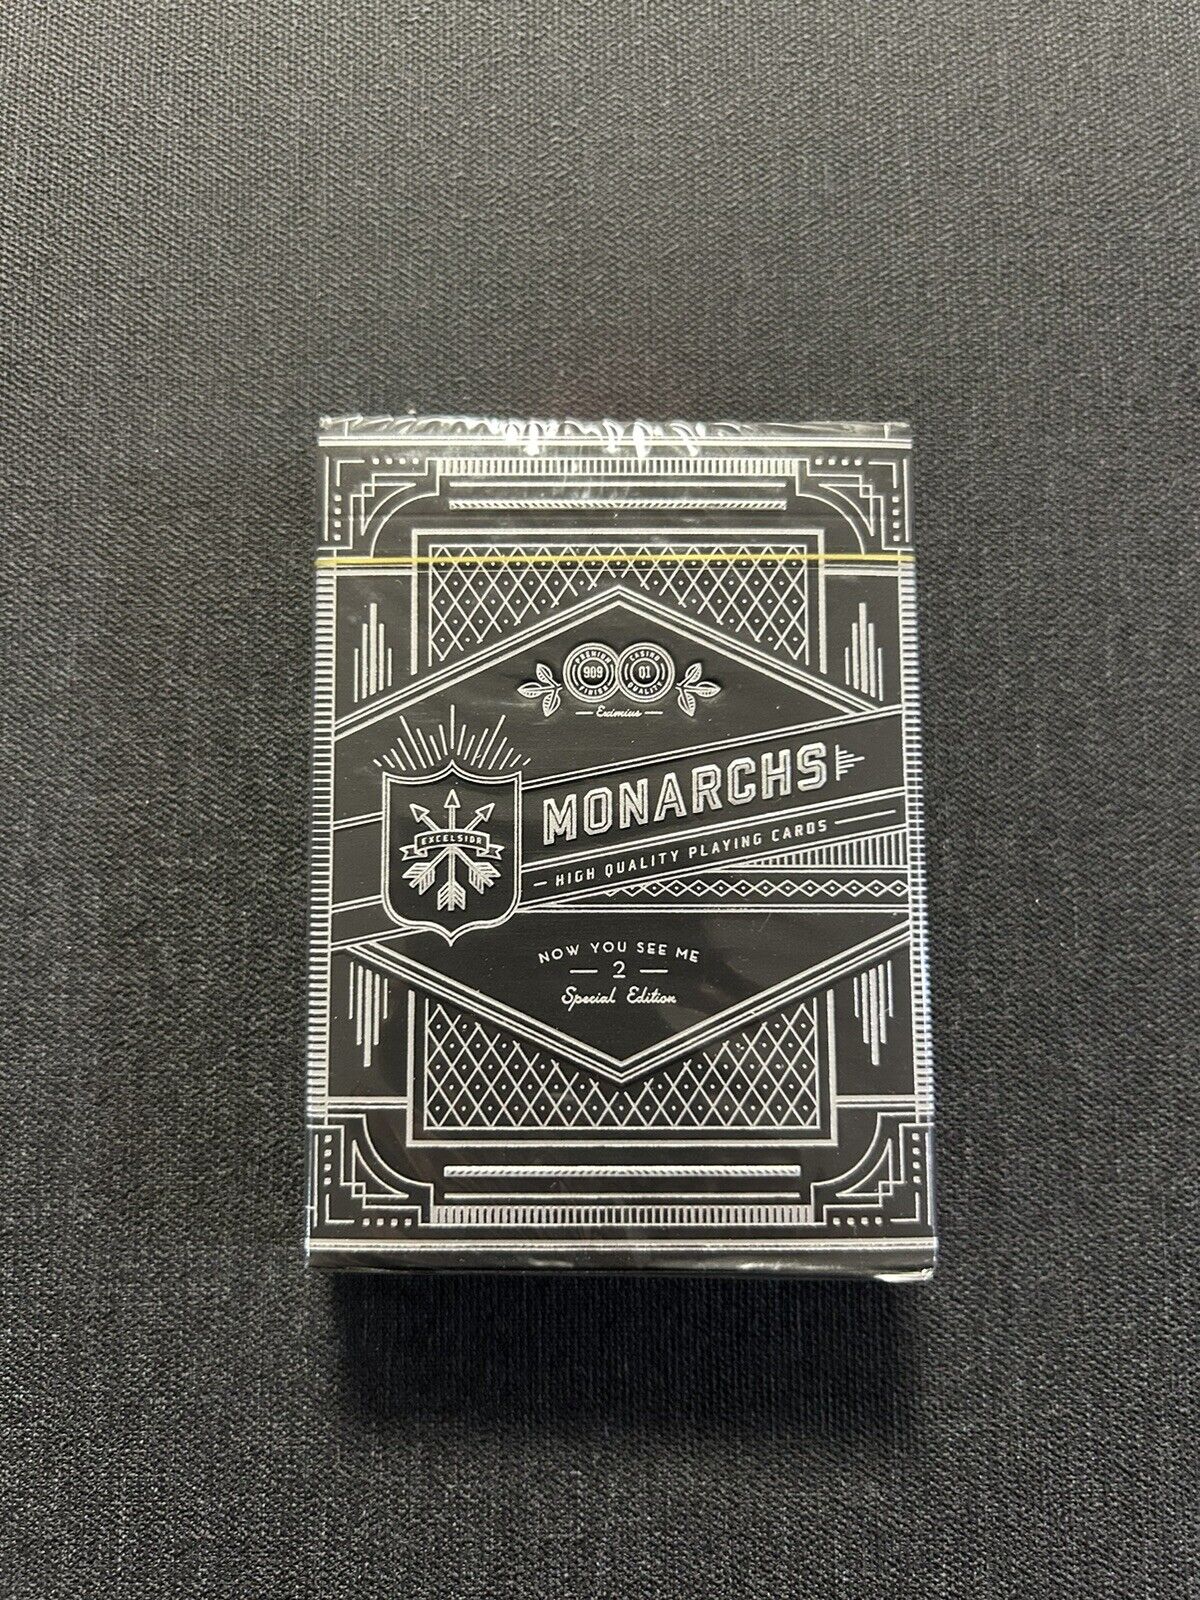 Theory 11 - Now You See Me 2 - Monarchs - Playing Cards - NYSM2